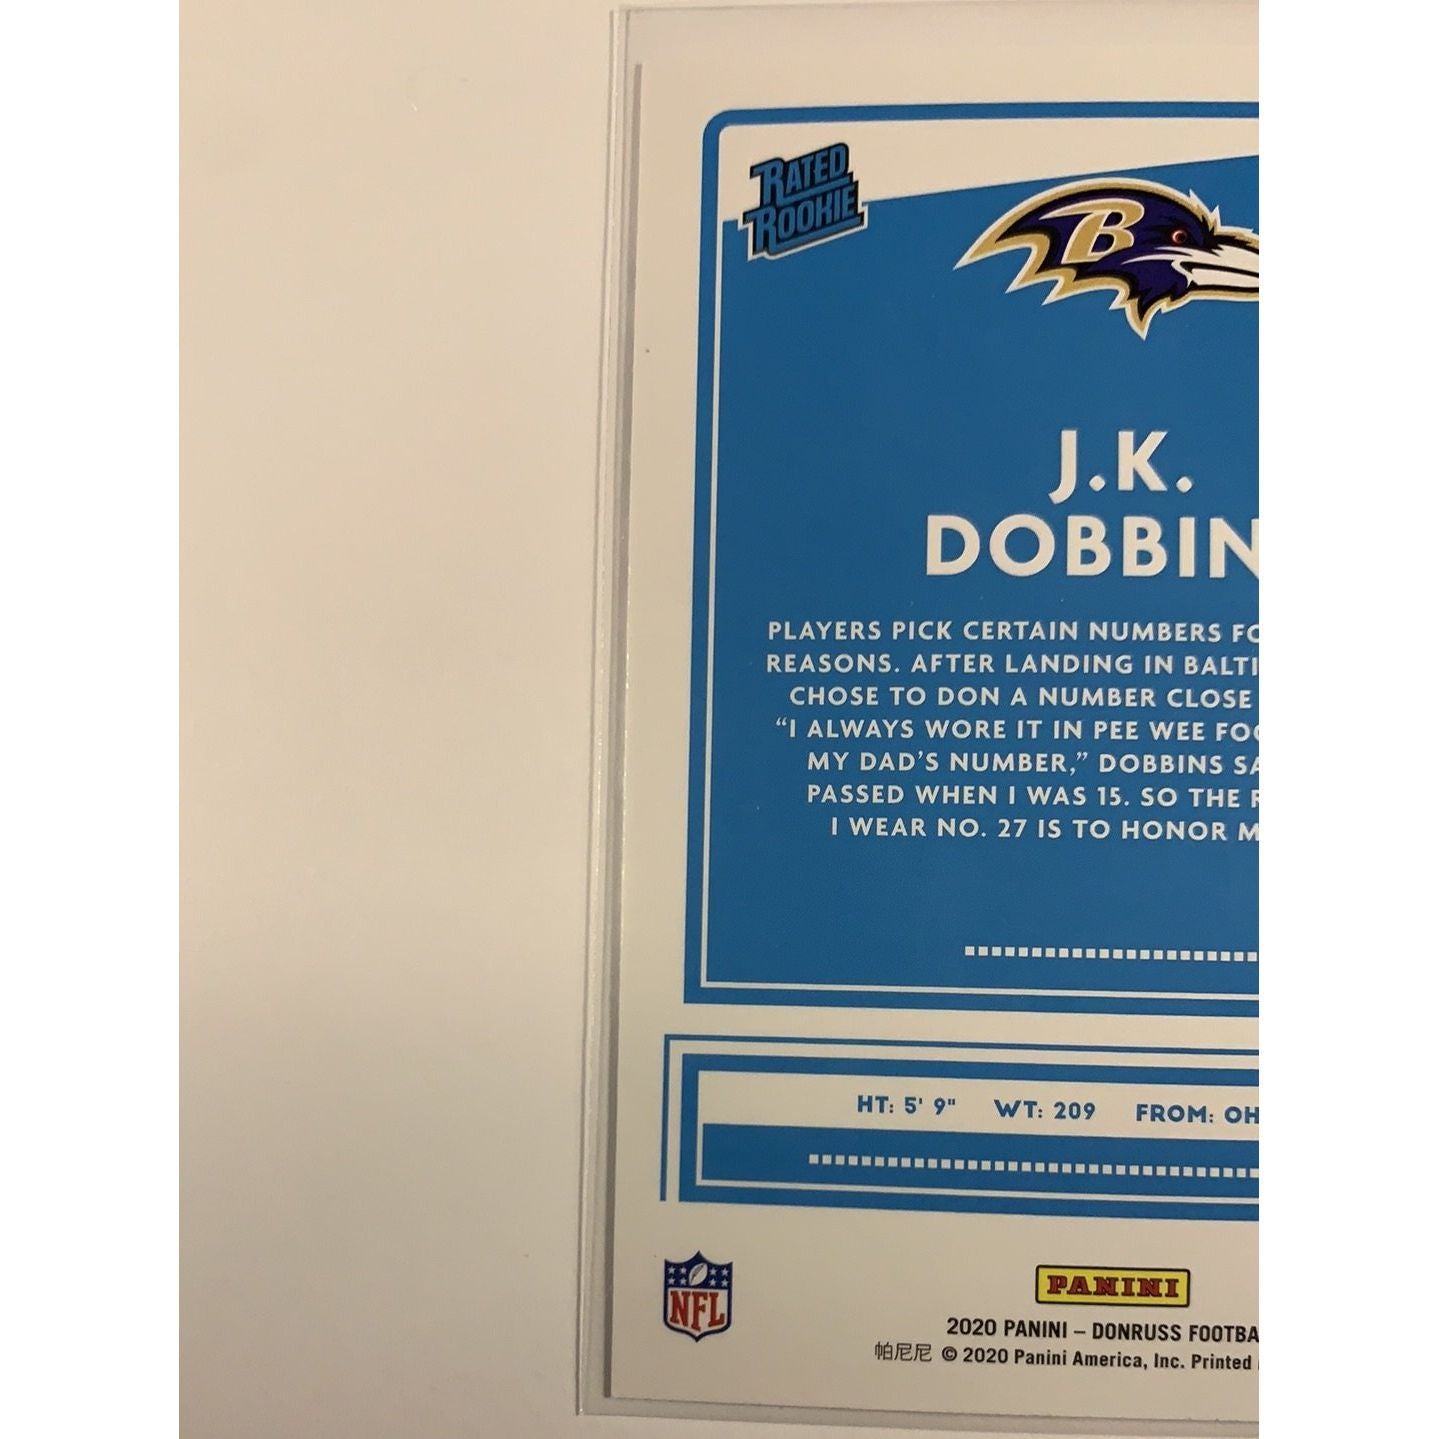  2020 Donruss J.K. Dobbins Rated Rookie  Local Legends Cards & Collectibles